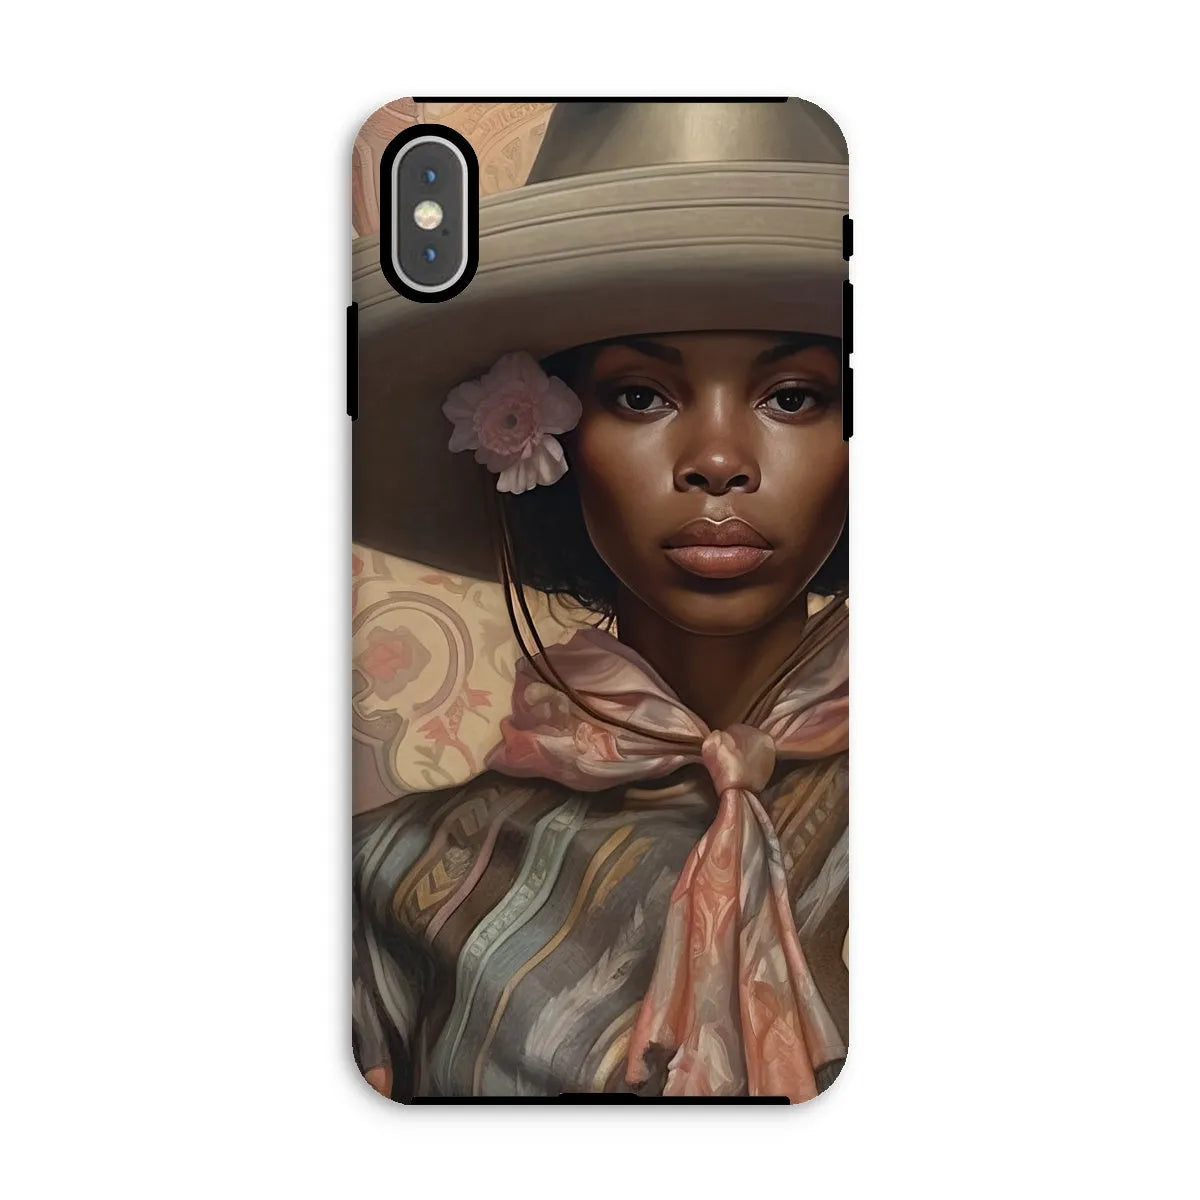 Sadie The Lesbian Cowgirl - Sapphic Art Phone Case - Iphone Xs Max / Matte - Mobile Phone Cases - Aesthetic Art